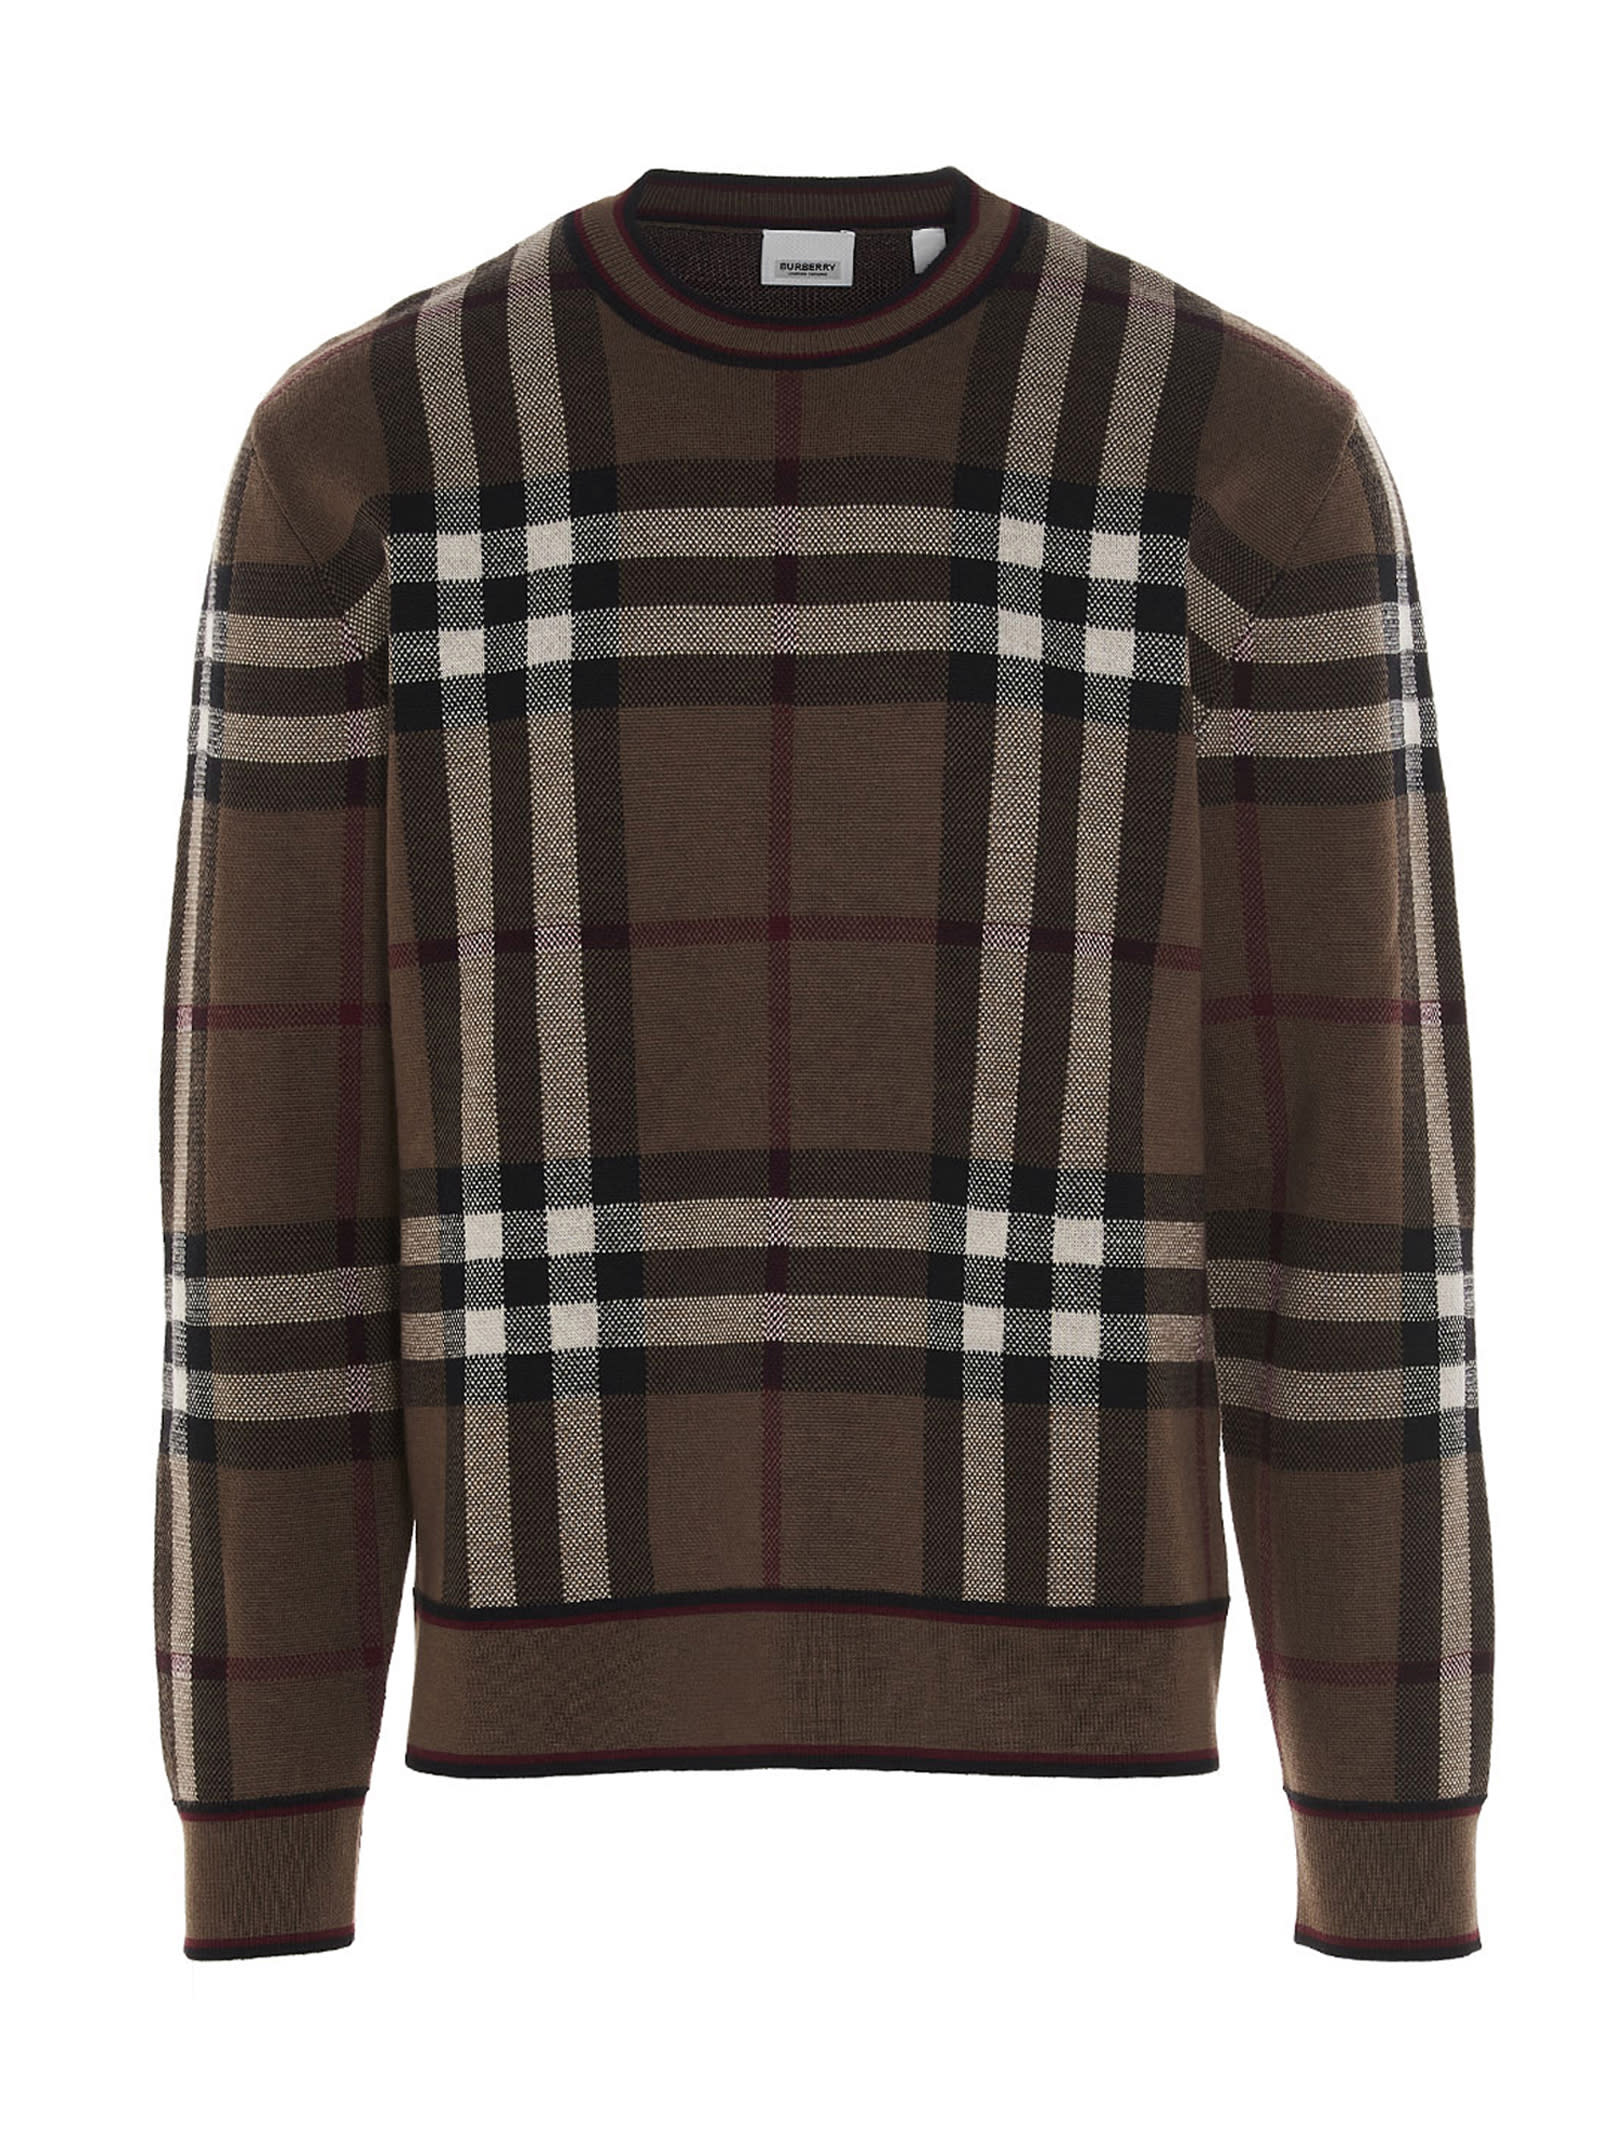 Burberry naylor Sweater